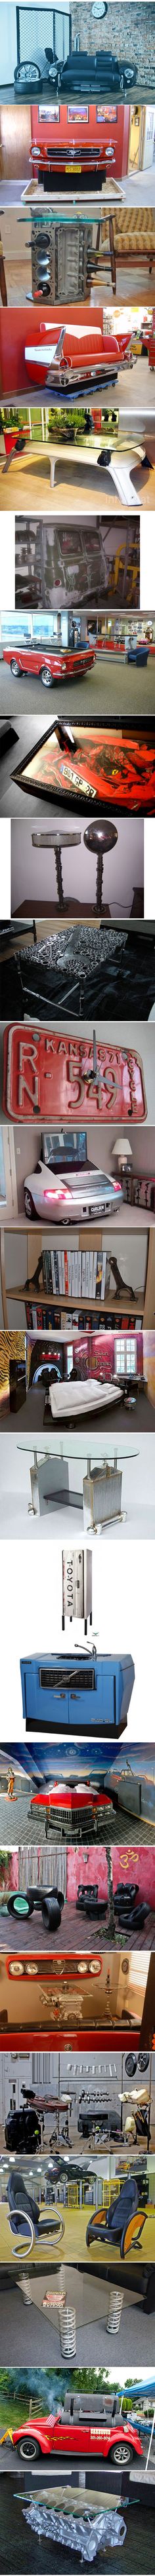 42 Simply Brilliants Ideas of Old Car Parts Are Recycled Into Furnishing  homesthetics (42)